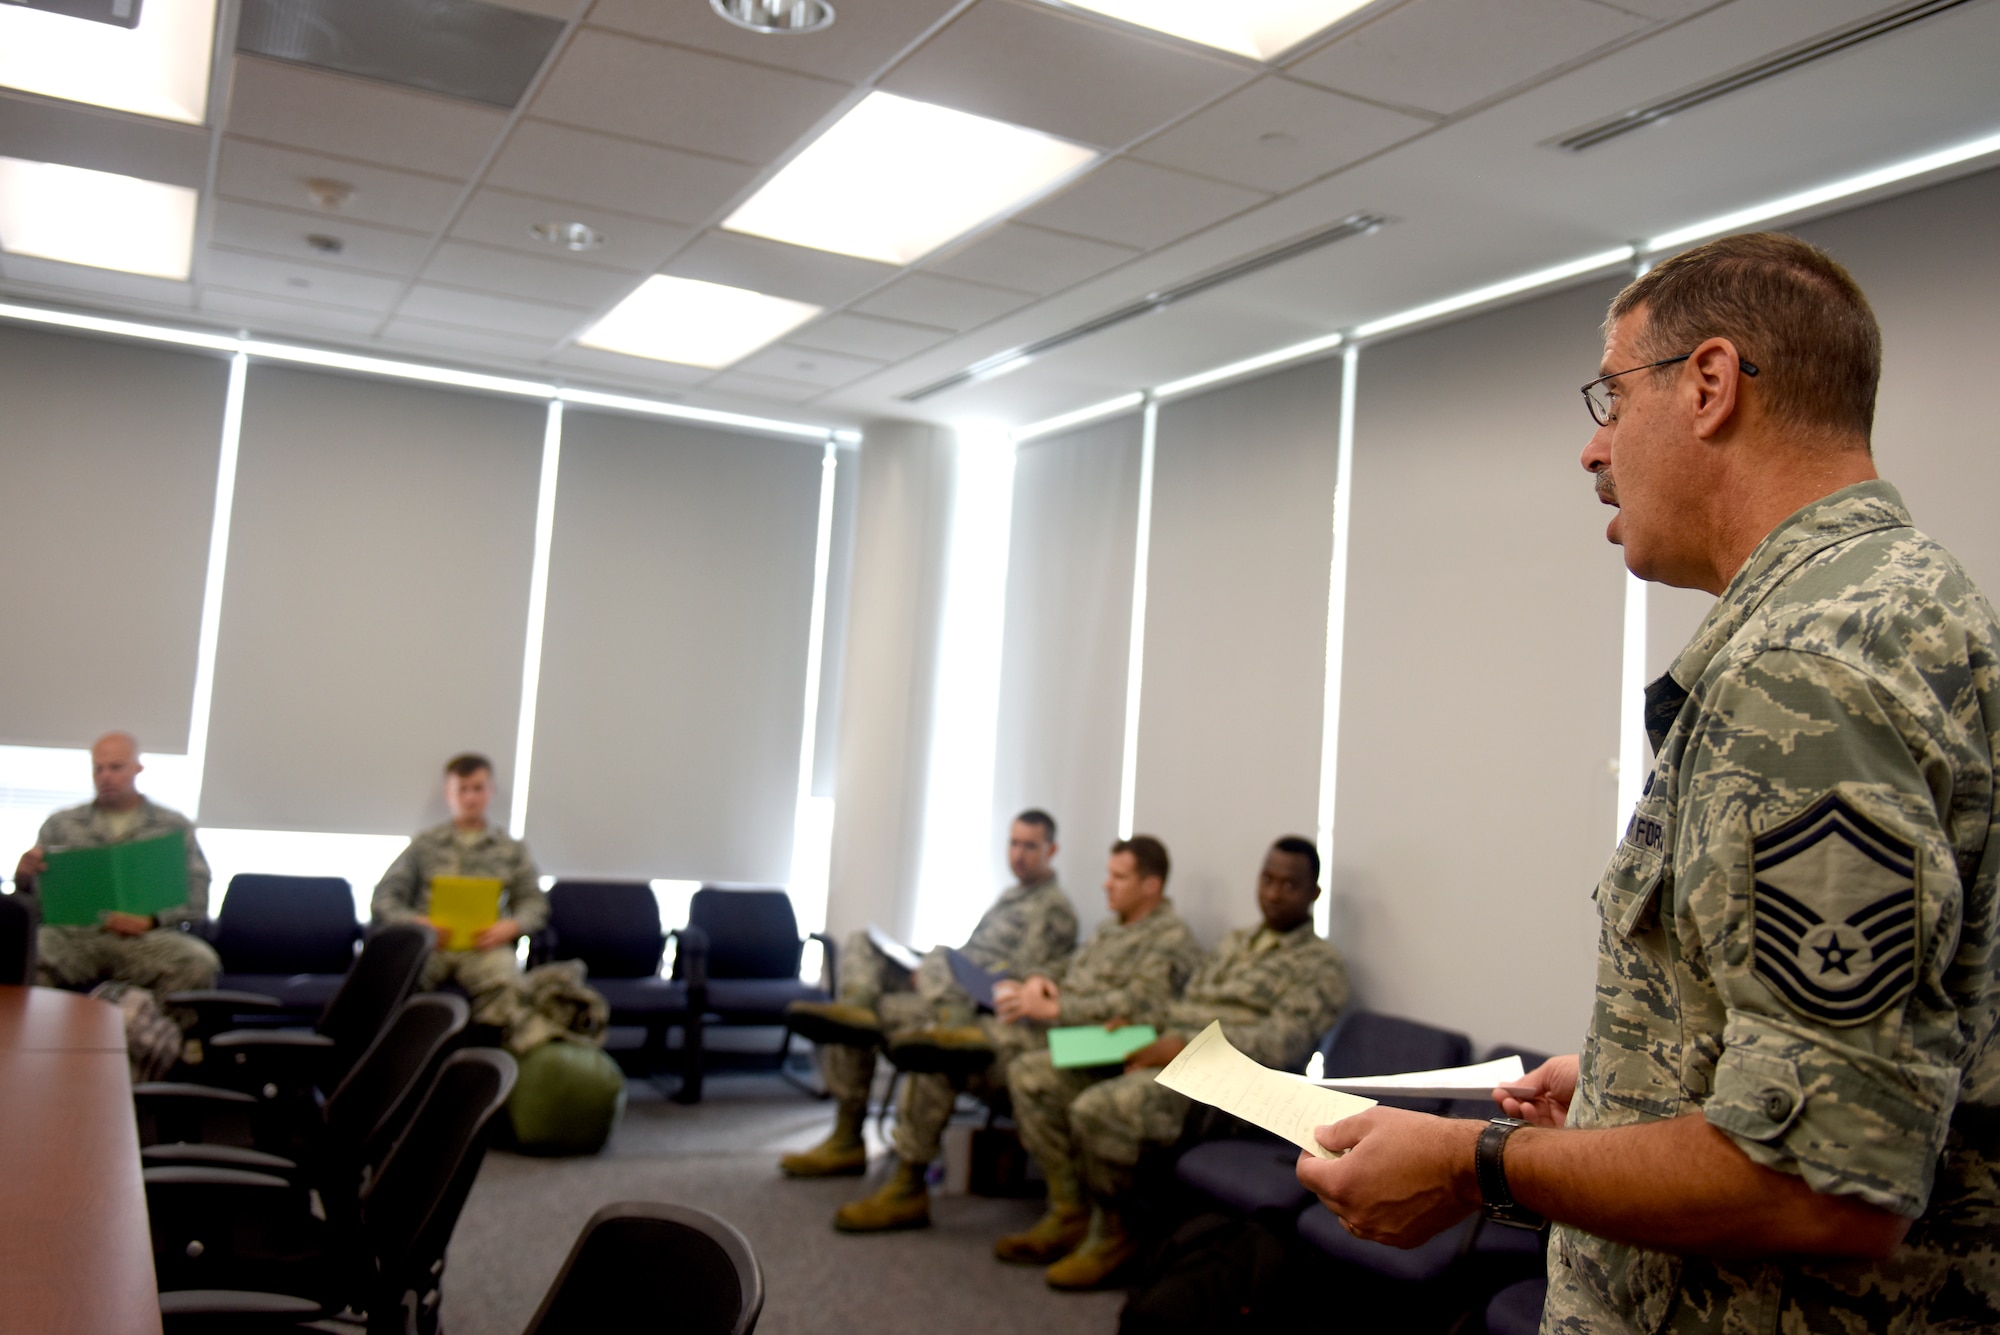 U.S. Air Force Senior Master Sgt. Gene Katz, operations and compliance superintendent with the 145th Logistics Readiness Squadron, briefs personnel assigned to an 11-person team ready to assist in Hurricane Florence Relief efforts at the North Carolina (N.C.) Air National Guard Base, Charlotte Douglas International Airport, Sept.17, 2018.  The 11-person team will create and move pallets filled with supplies like food and water in a Kinston, N.C. airport.